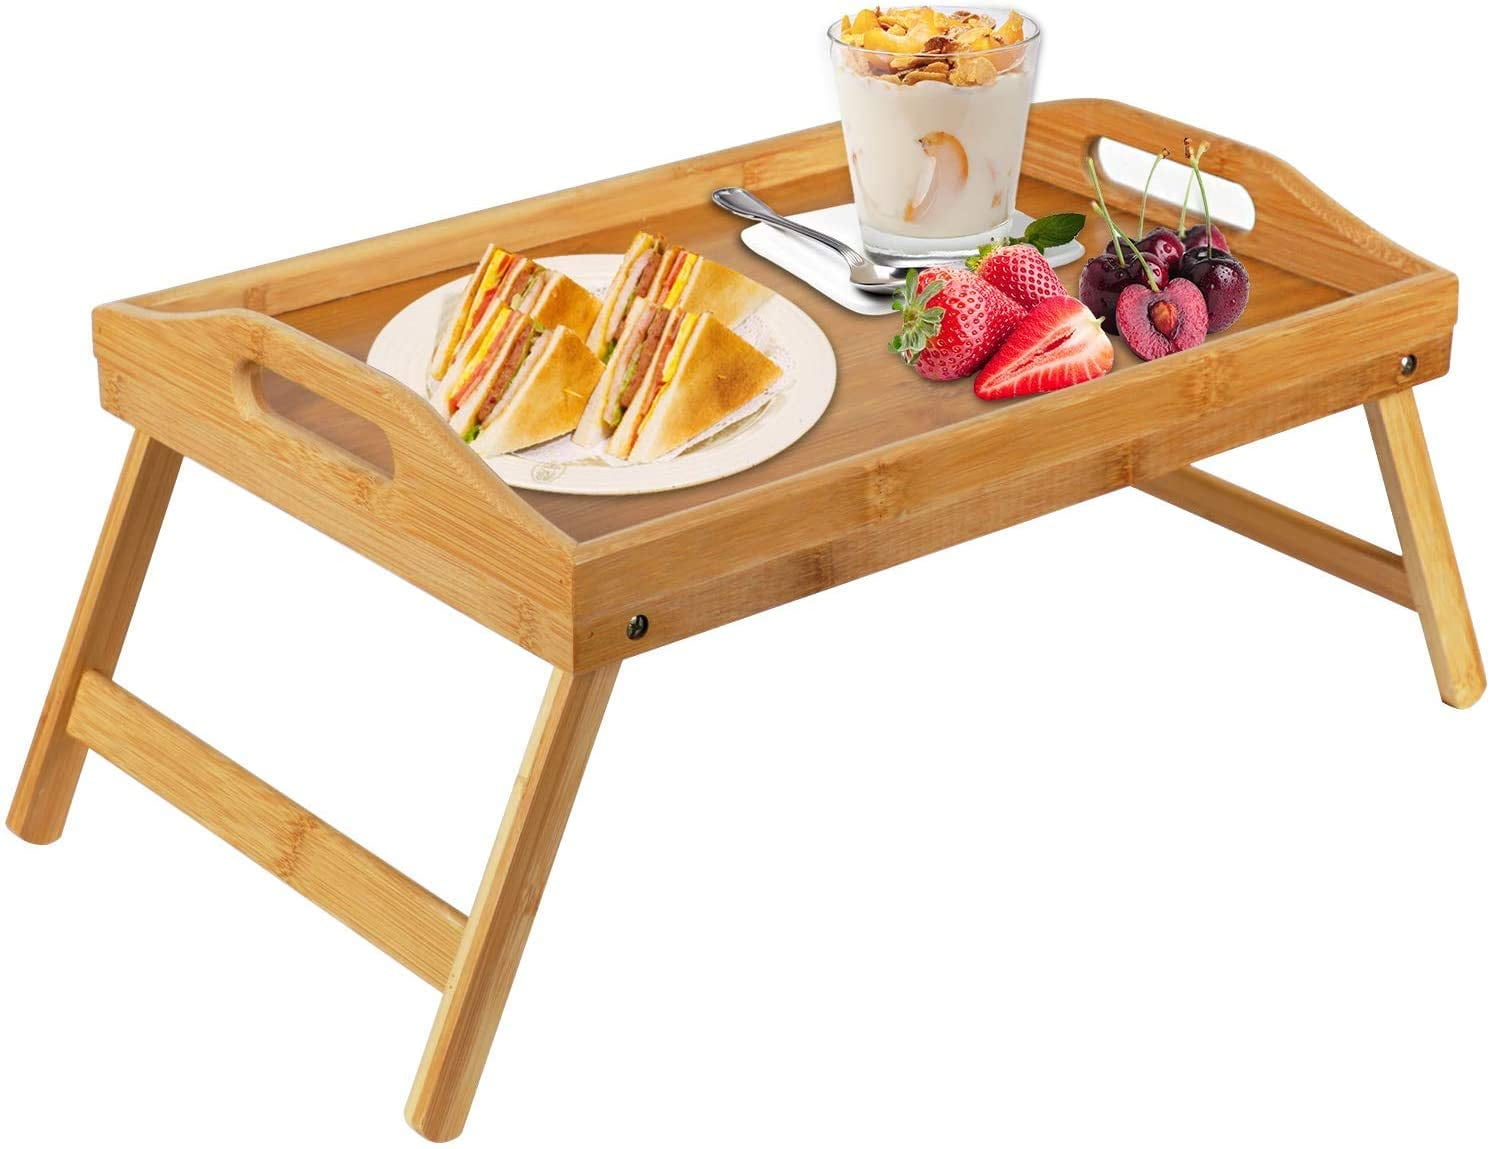 Labtop Desk Greenco Foldable Bamboo Breakfast Table Serving Tray Bed Table 